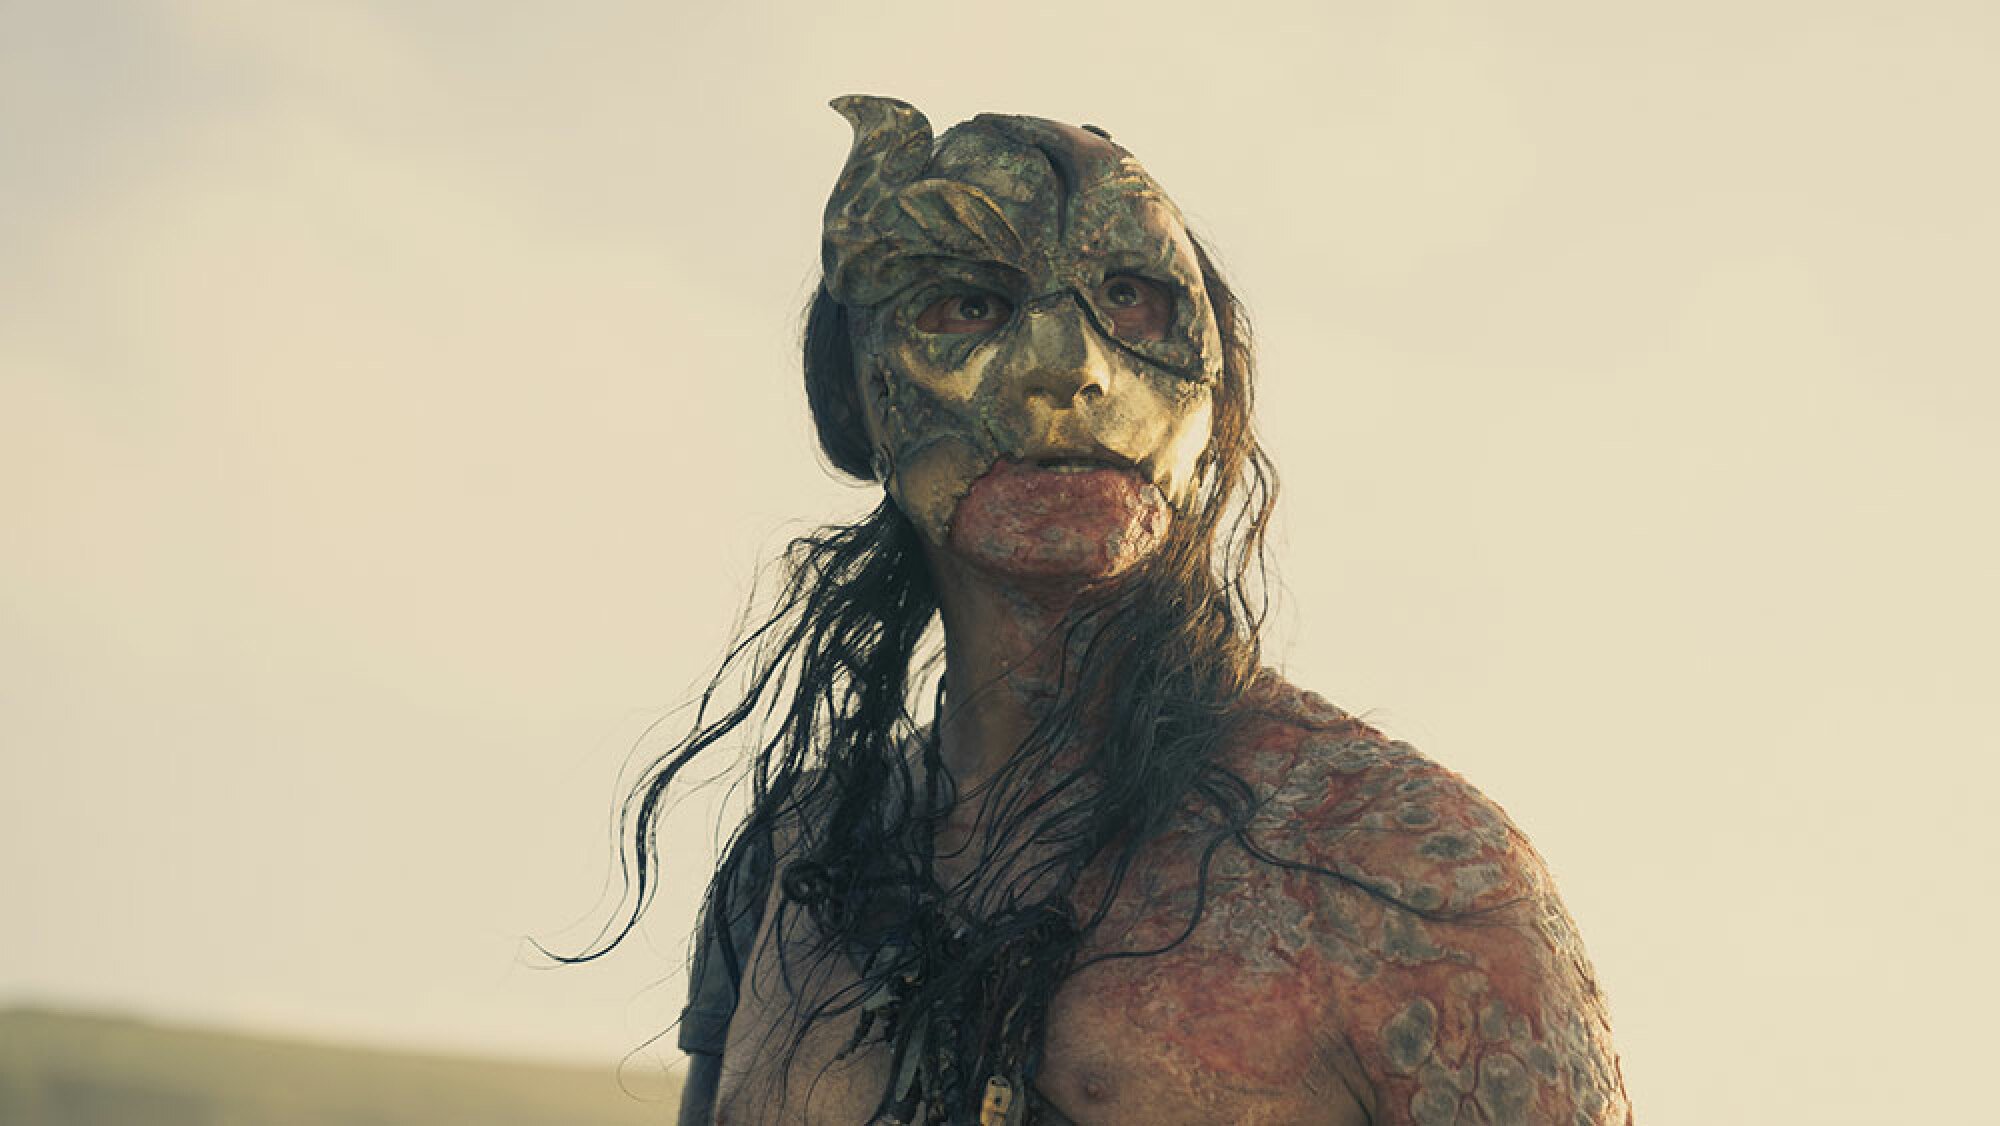 A man with long hair stands shirtless outdoors, wearing a mask.